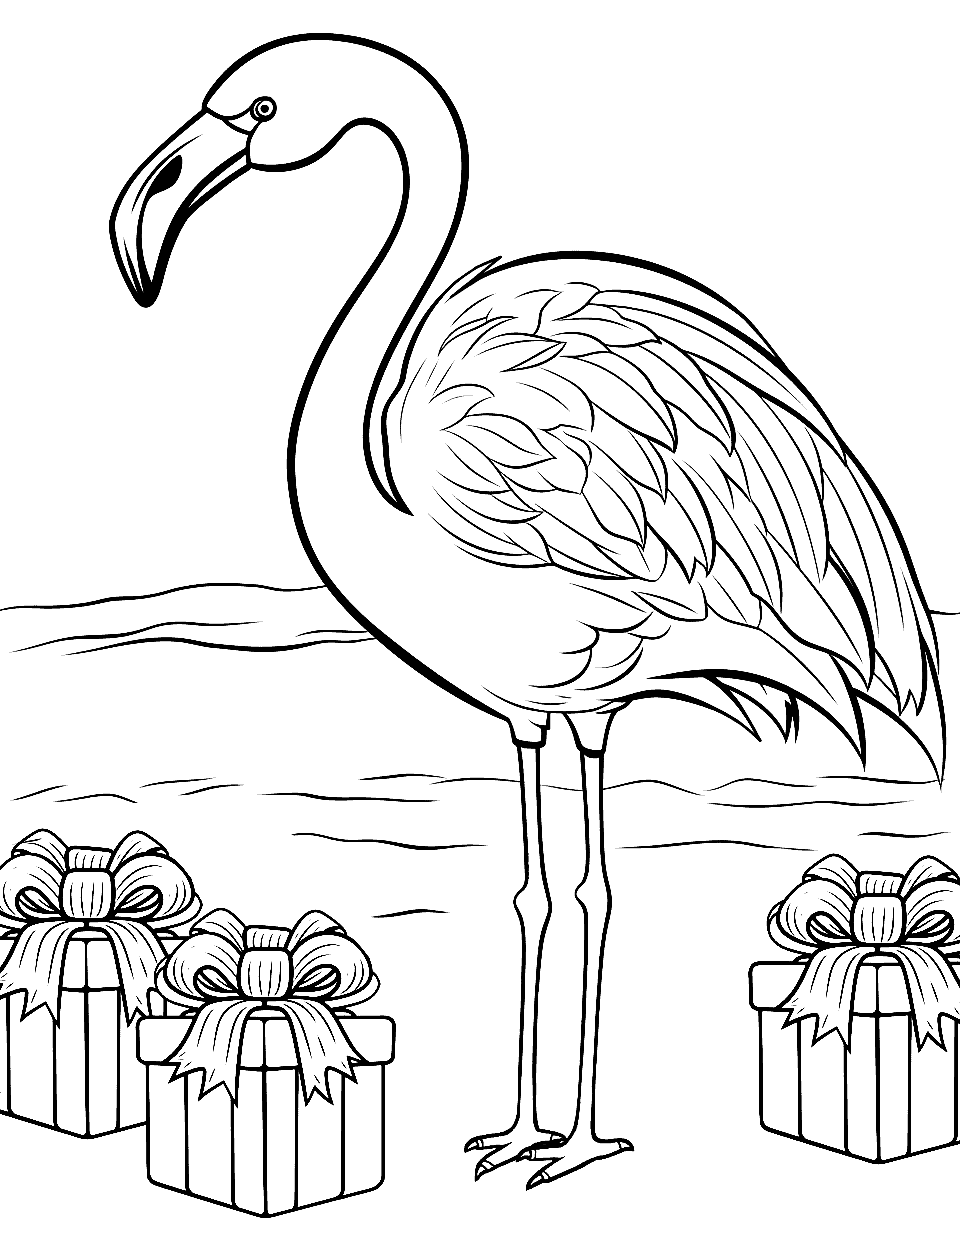 Christmas Flamingo with Gifts Coloring Page - A festive flamingo surrounded by Christmas gifts.